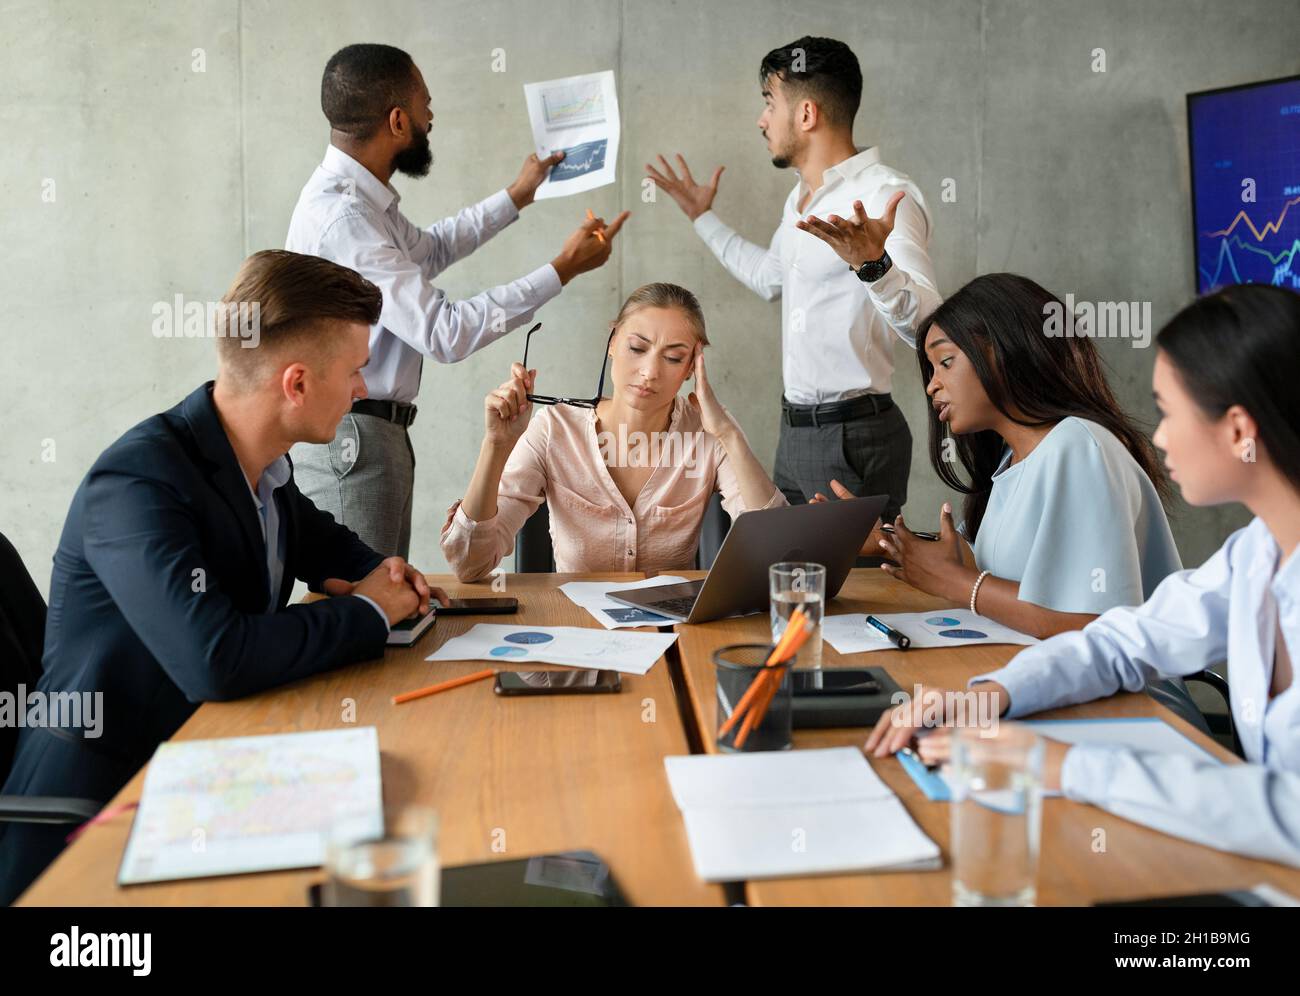 Workplace Conflicts. Stressed Group Of Business People Having Disagreements During Corporate Meeting Stock Photo